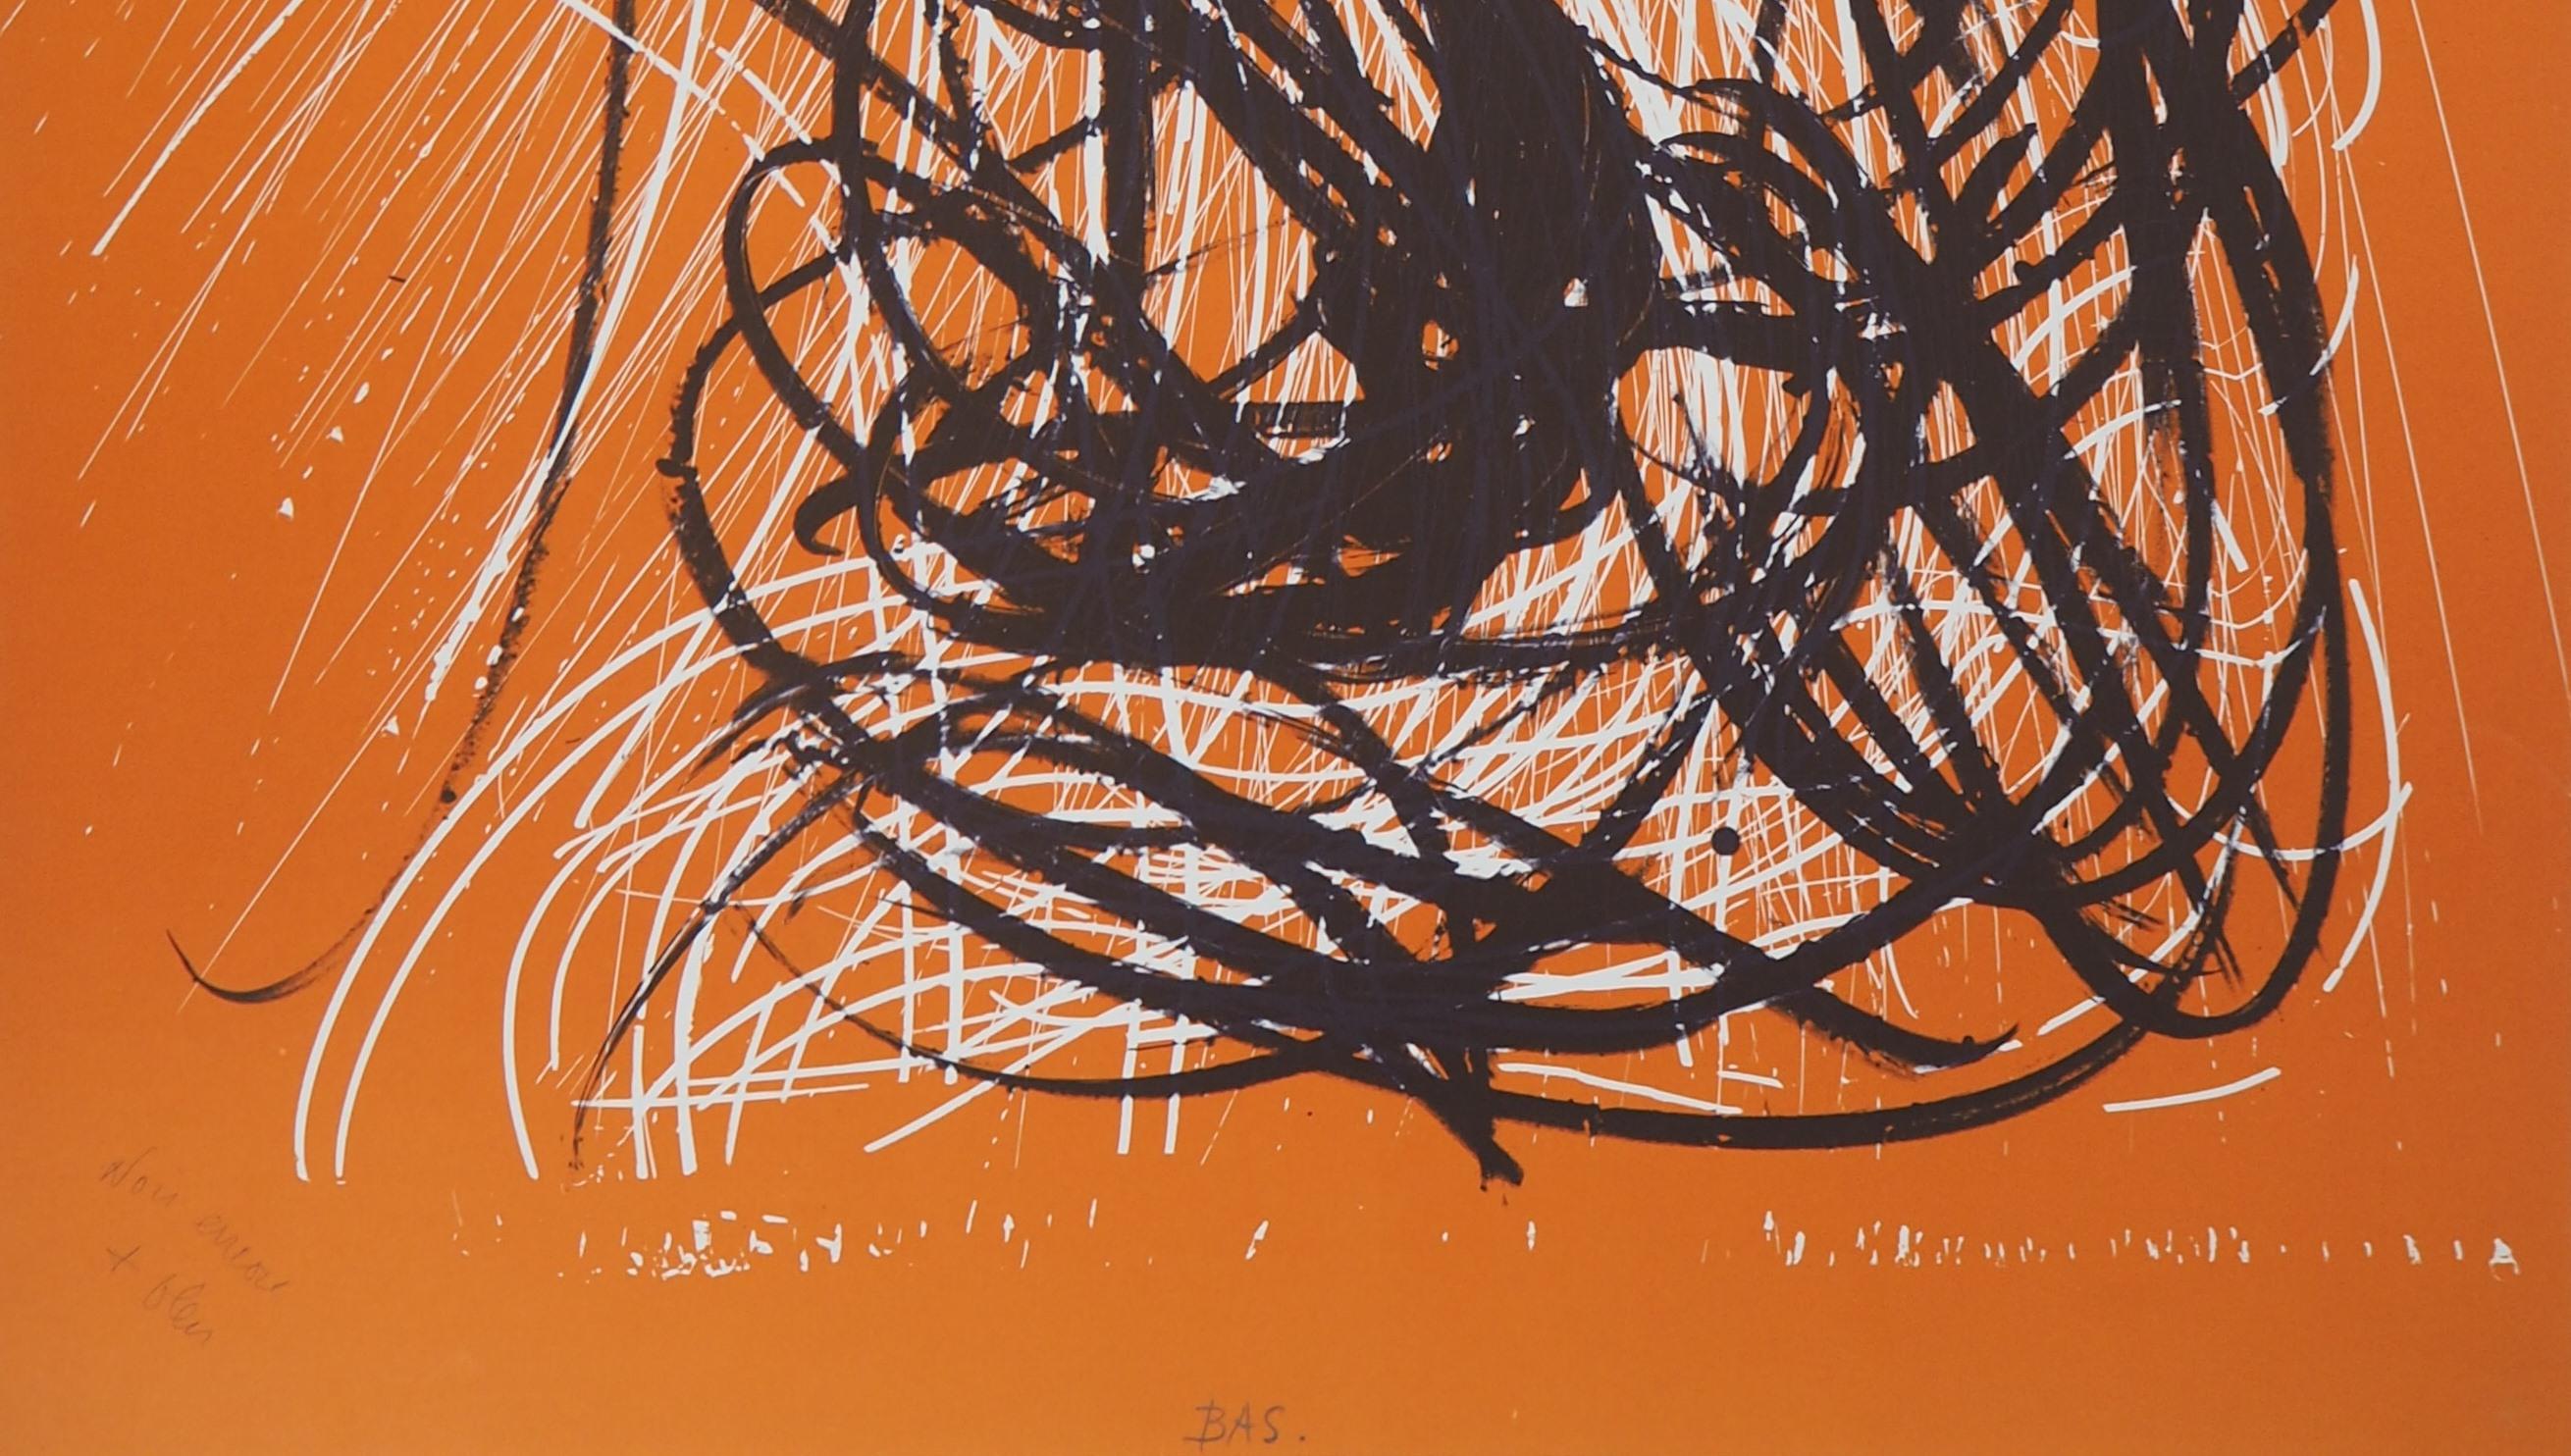 Hans HARTUNG
S Orange Abstract Composition, 1971

Original lithograph (Workshop Arte/Maeght)
On BFK Rives vellum 76 x 55 cm (c. 29.9 x 21.6 inch)
Annotated by the artist in pencil (see pictures)

REFERENCE: catalogue raisonné 